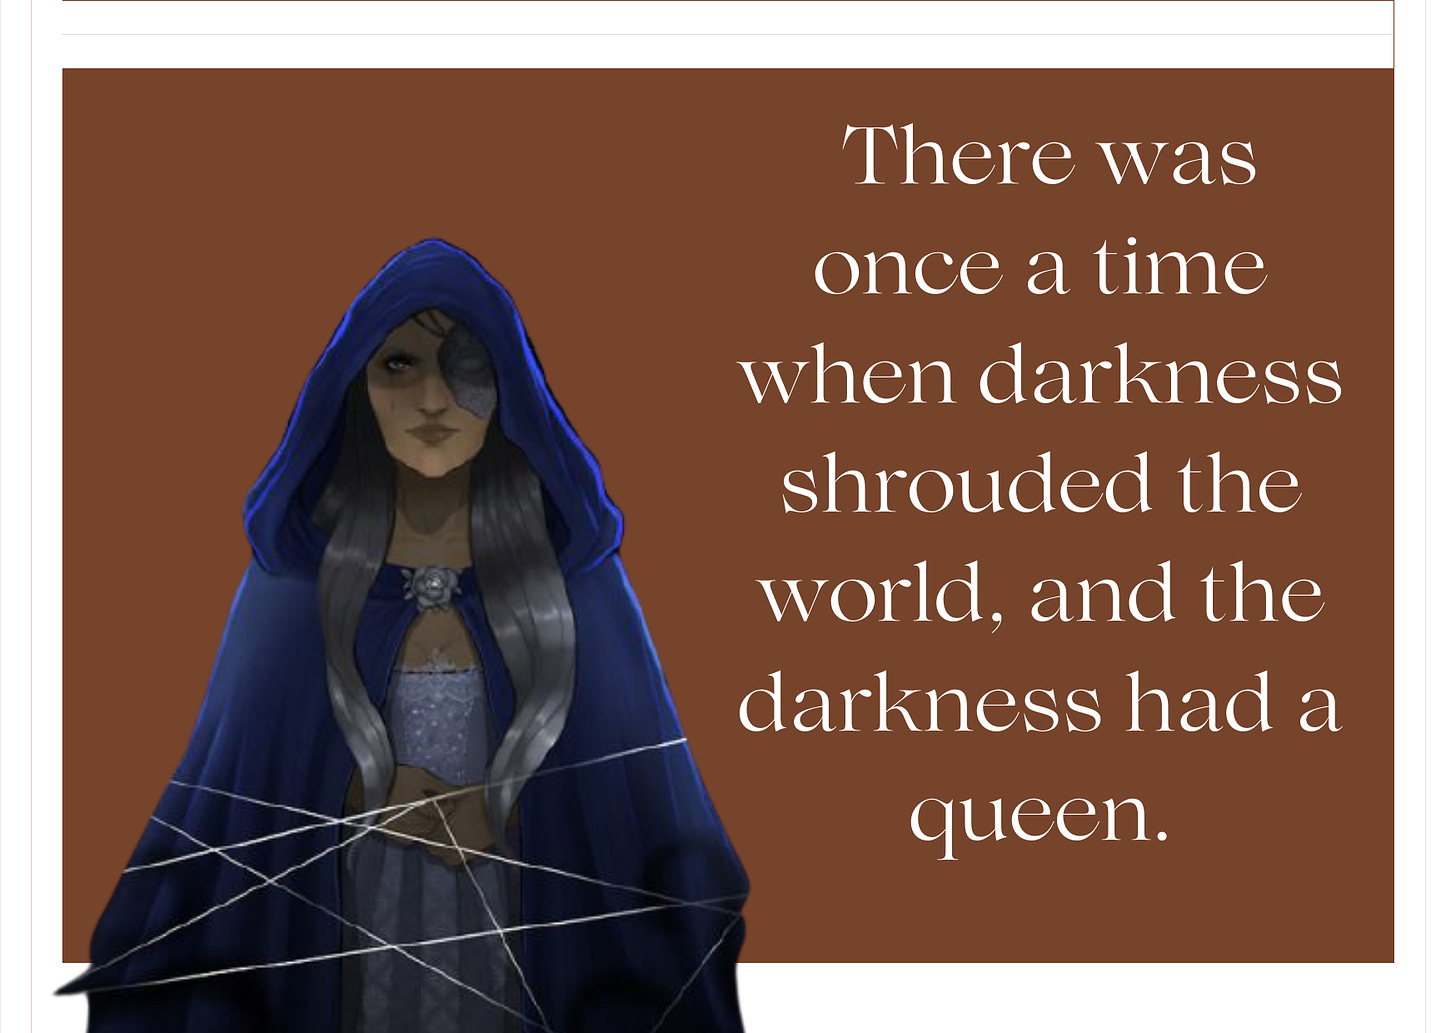 Adelina Amouteru from The Young Elites series quotes